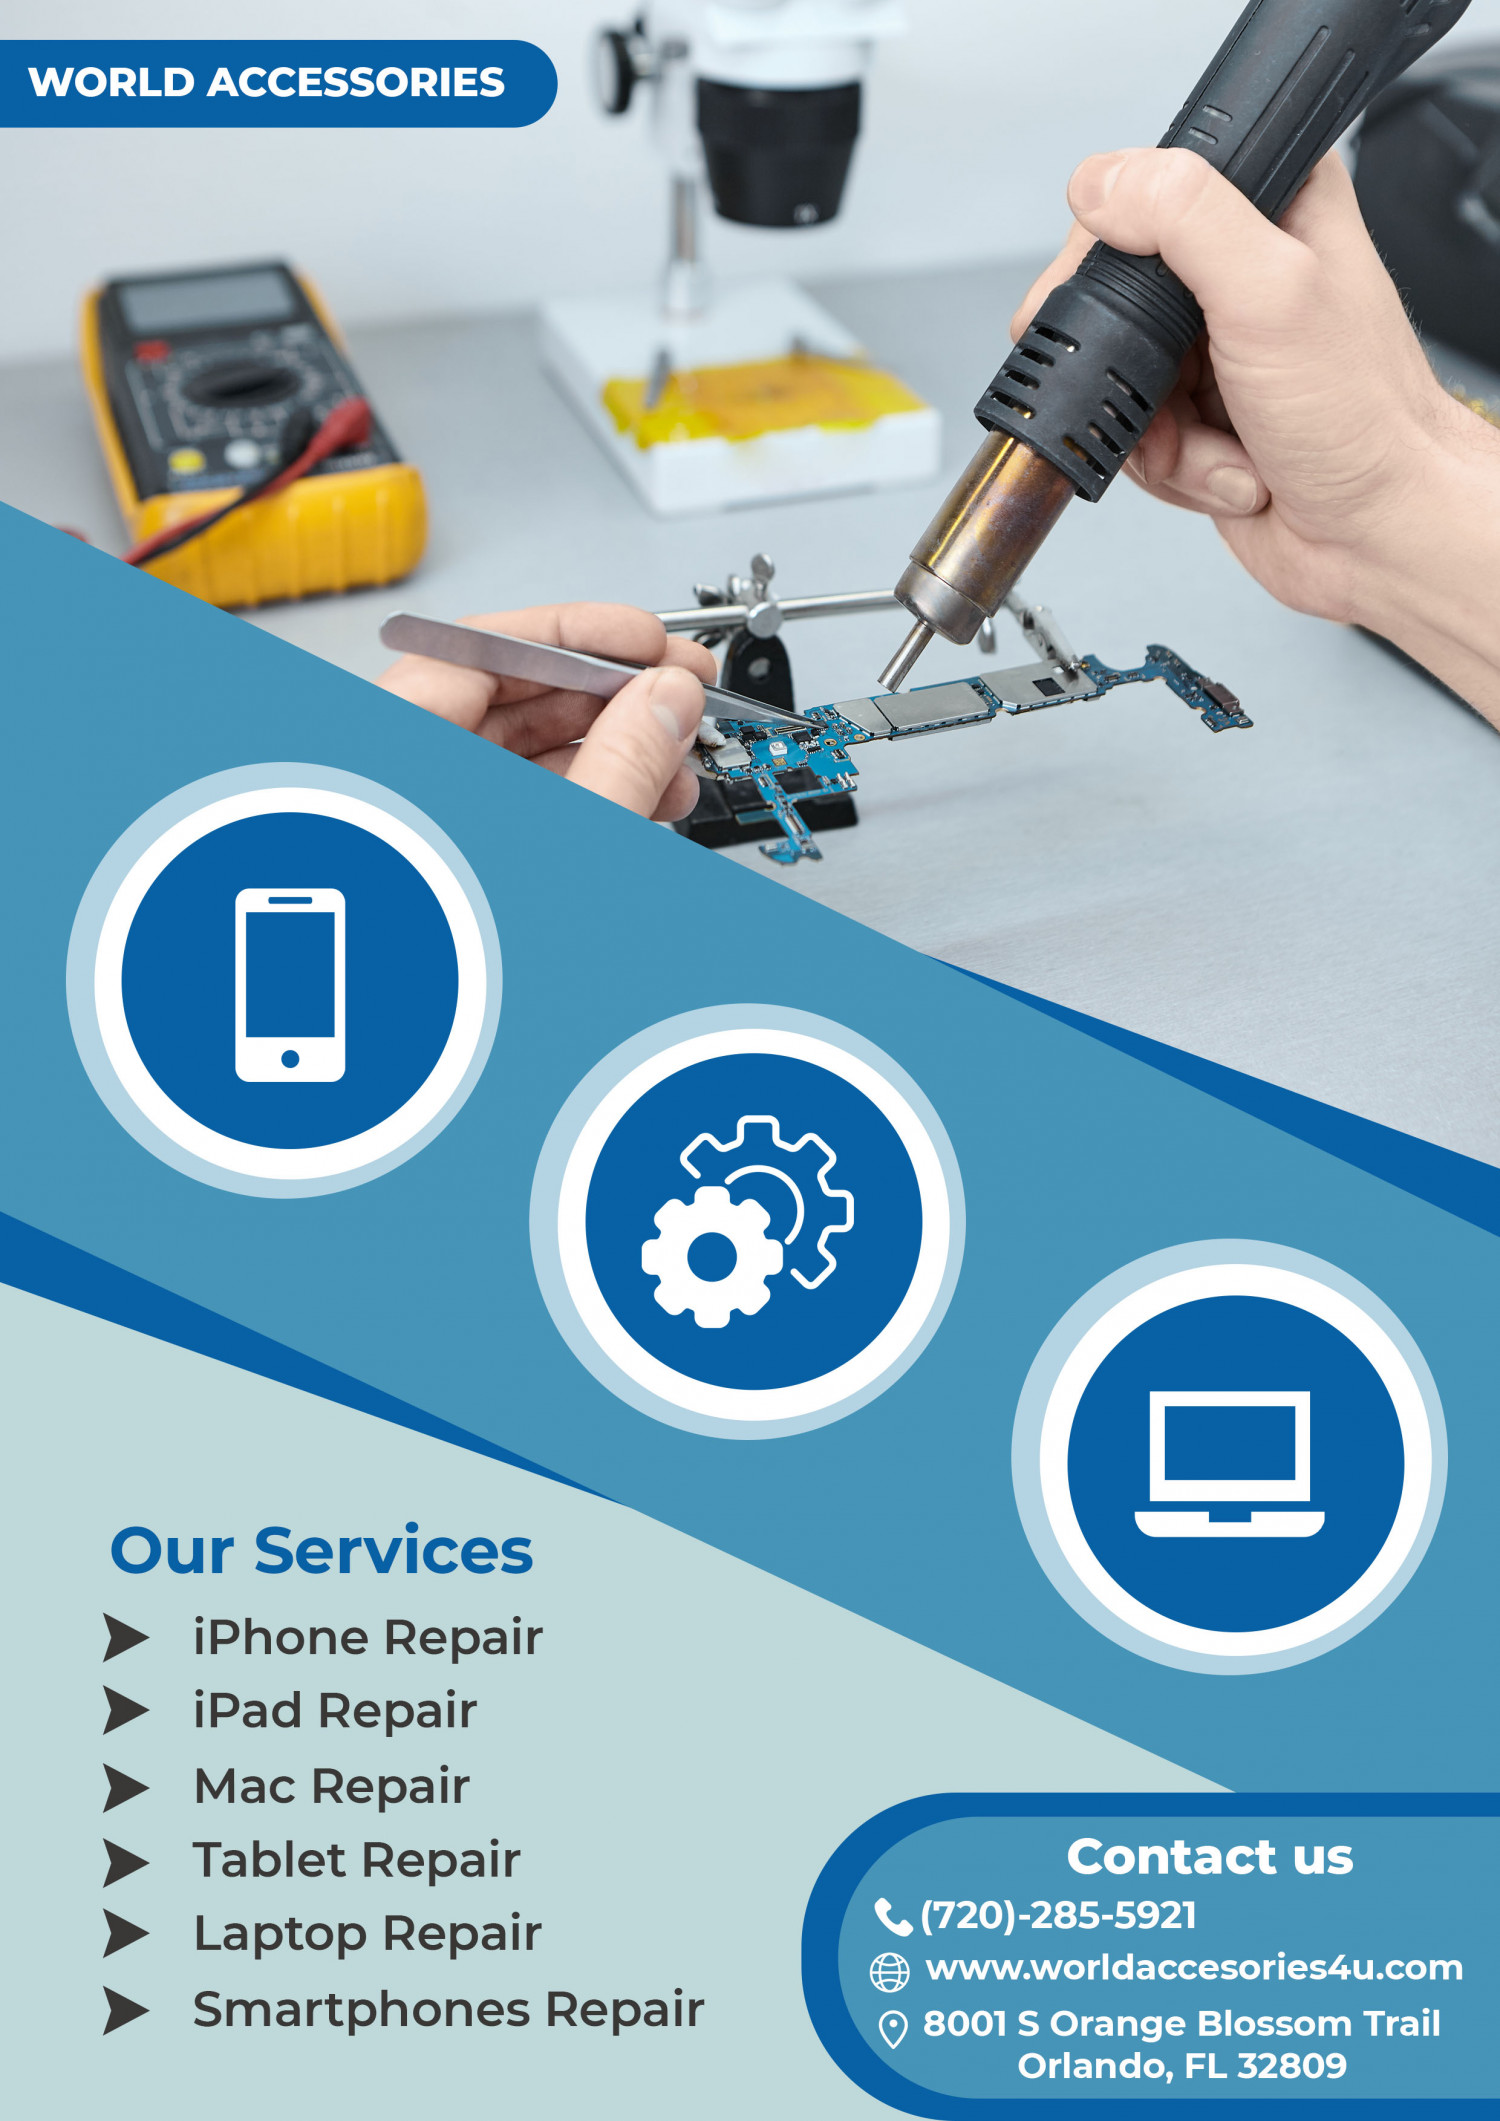 Smart Devices Repairing shop Infographic